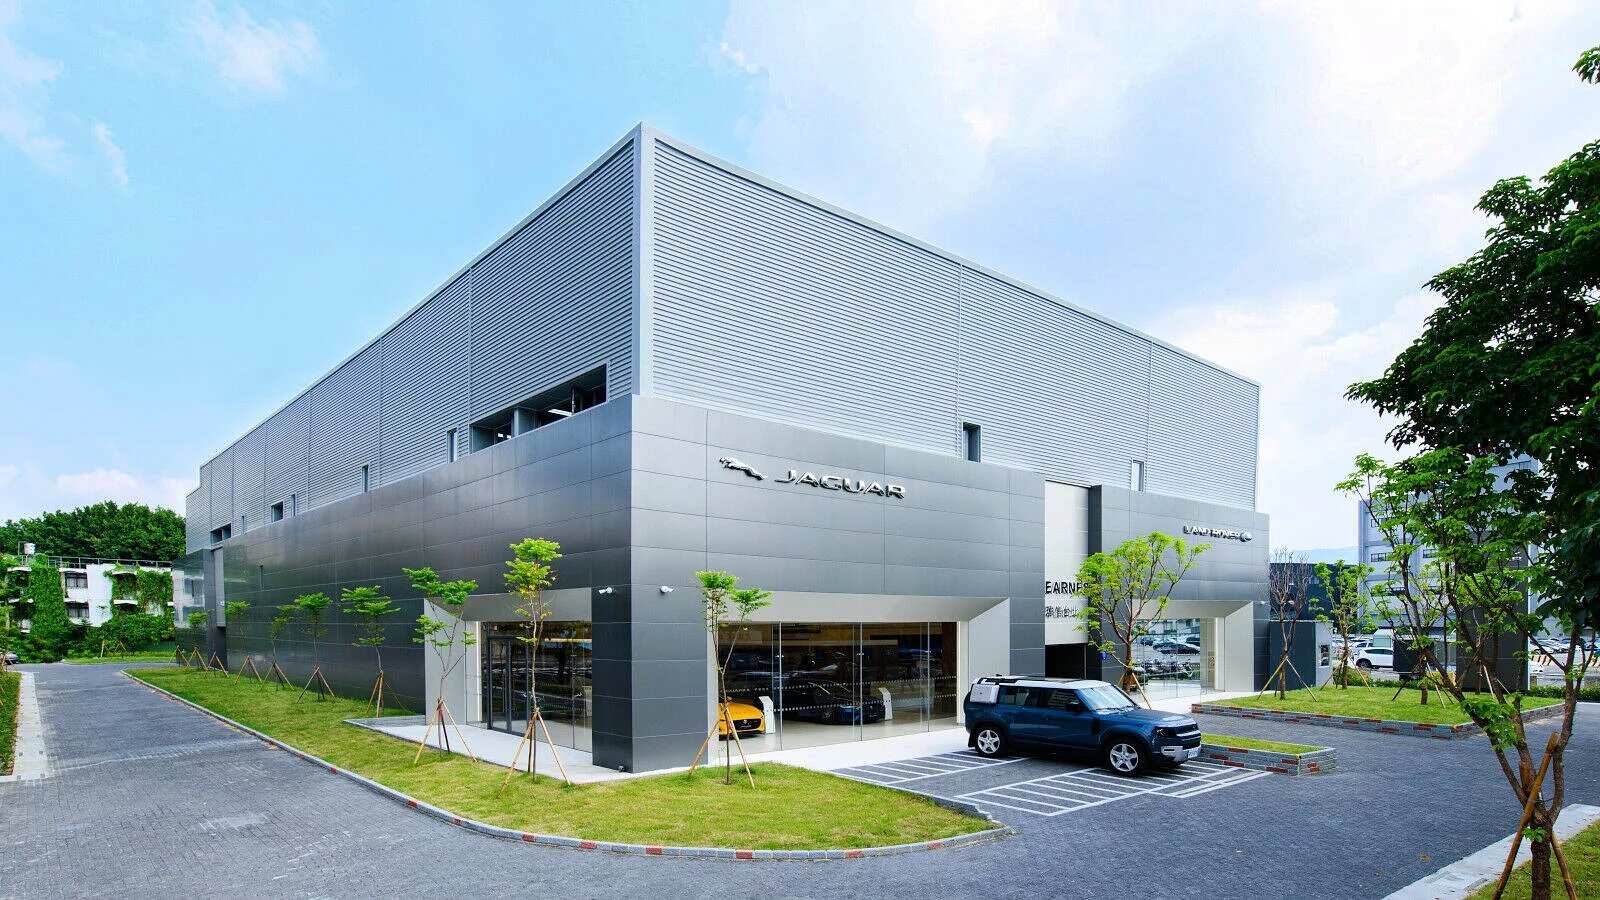 Jaguar Land Rover Continues To Expand Its Service Territory In Greater Taipei, And Weixin Taipei's Flagship Exhibition And Service Center Officially Opened.